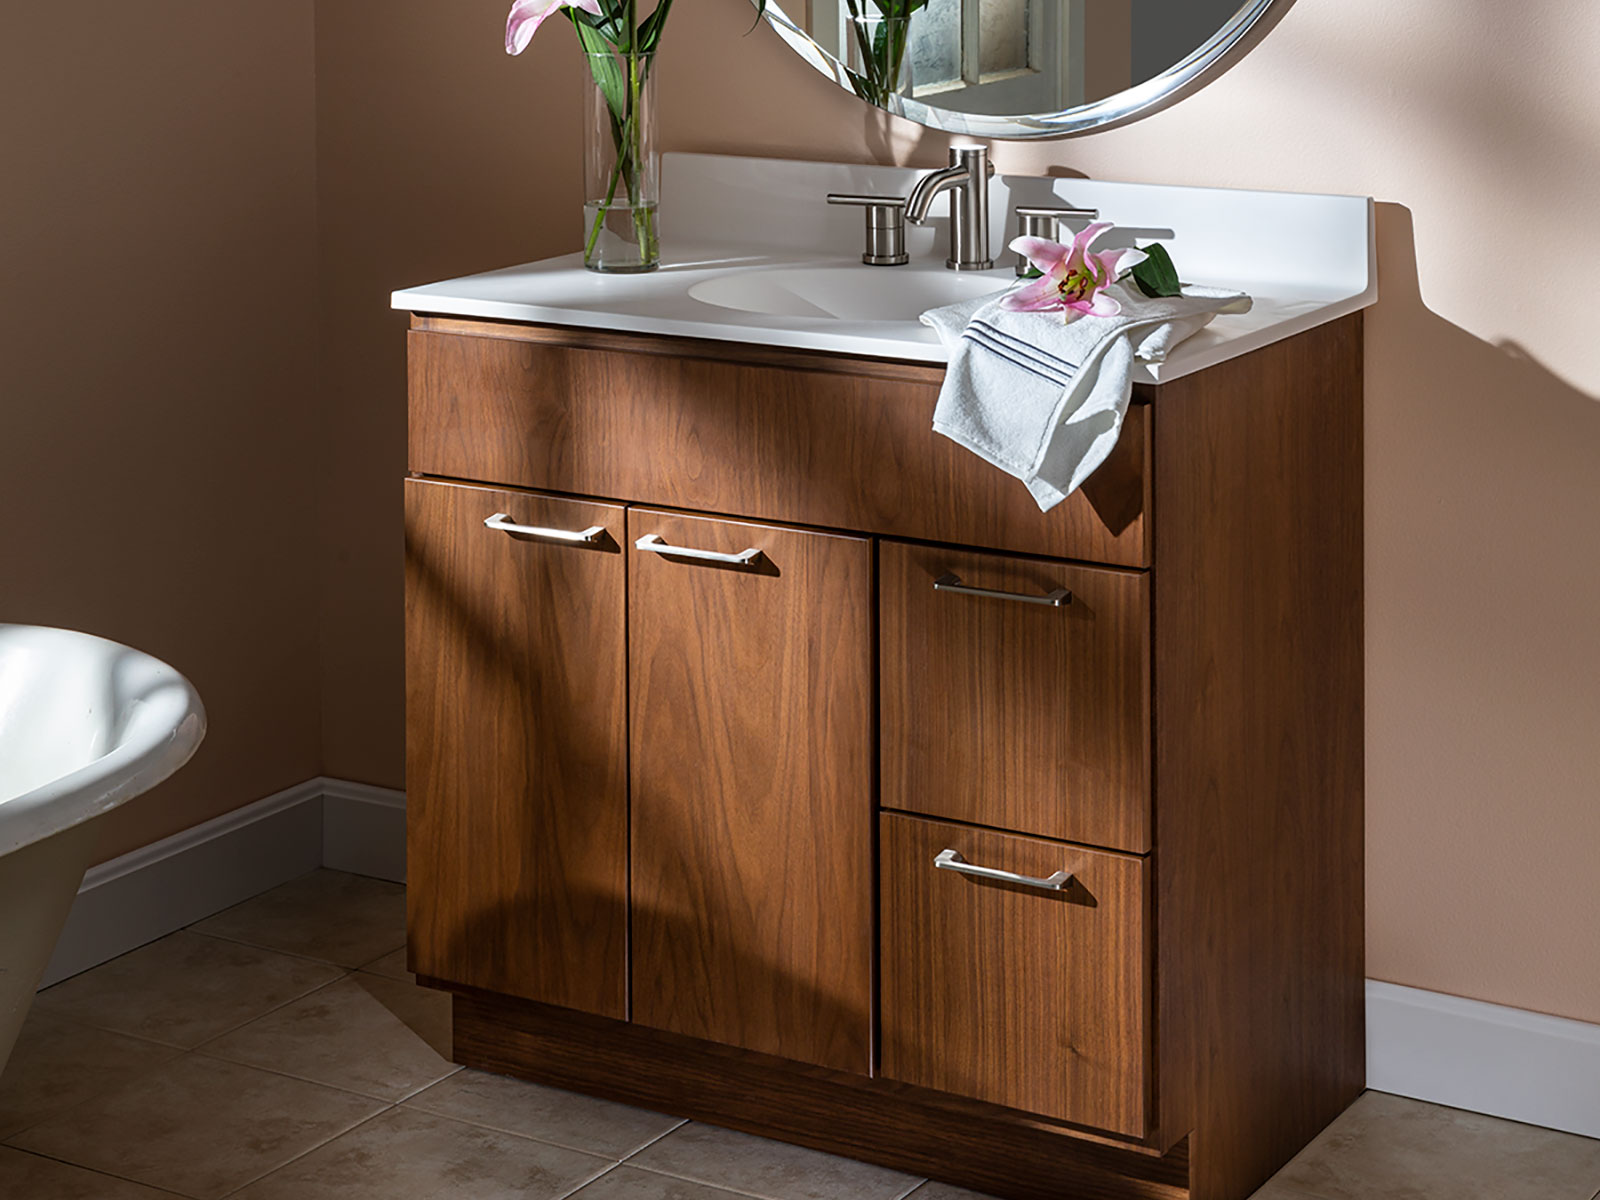 Bath Vanities And Cabinetry, Furniture Style Bathroom Vanity Cabinets